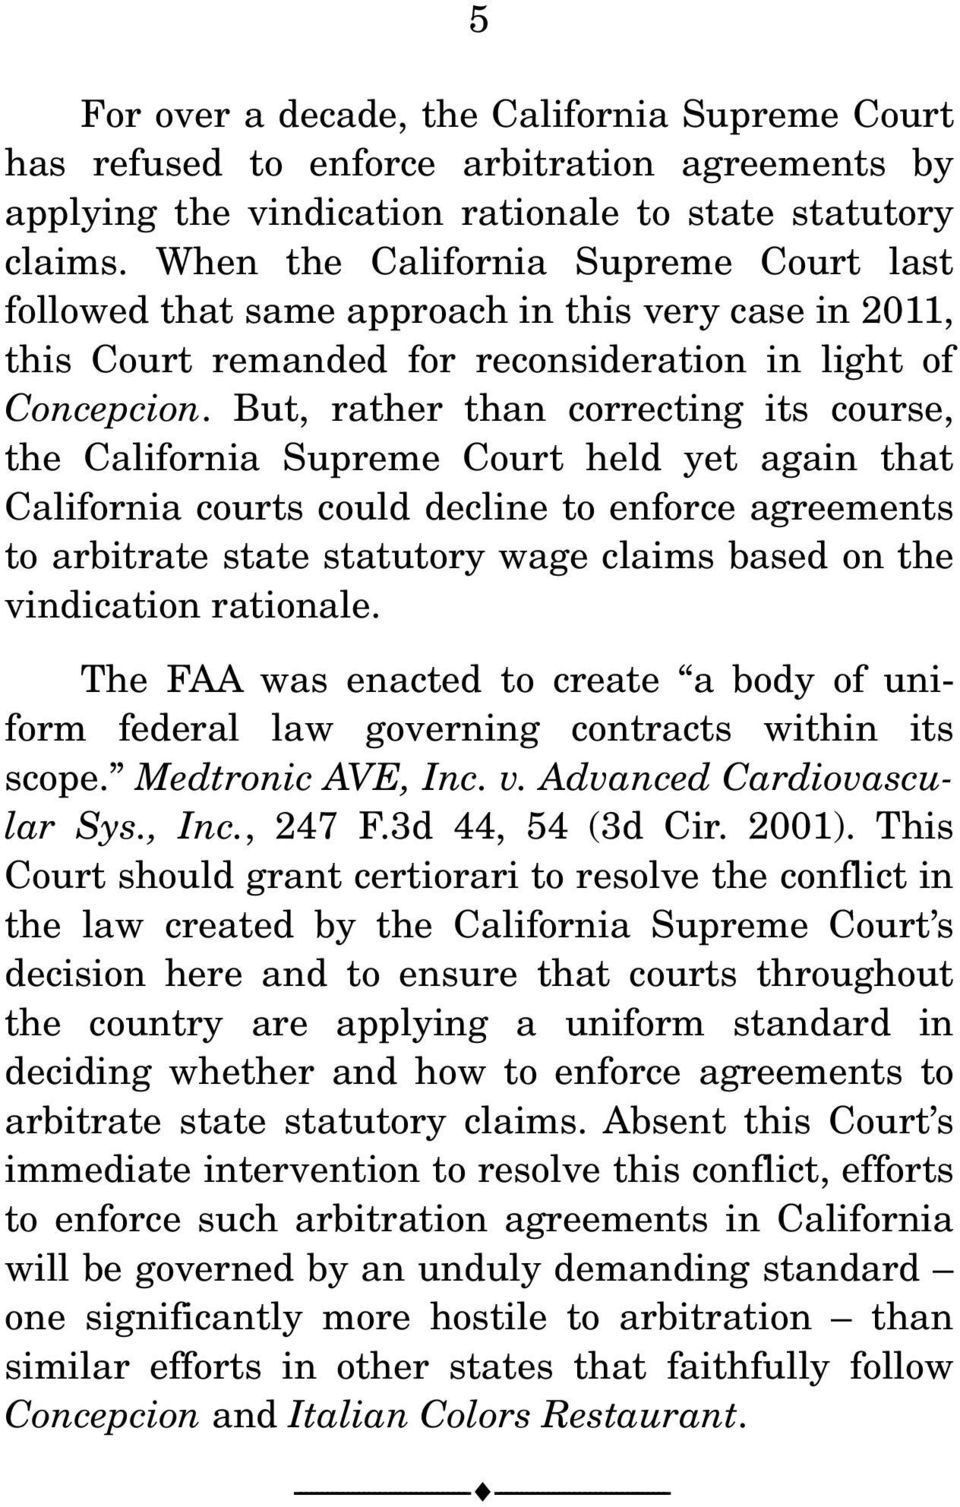 But, rather than correcting its course, the California Supreme Court held yet again that California courts could decline to enforce agreements to arbitrate state statutory wage claims based on the